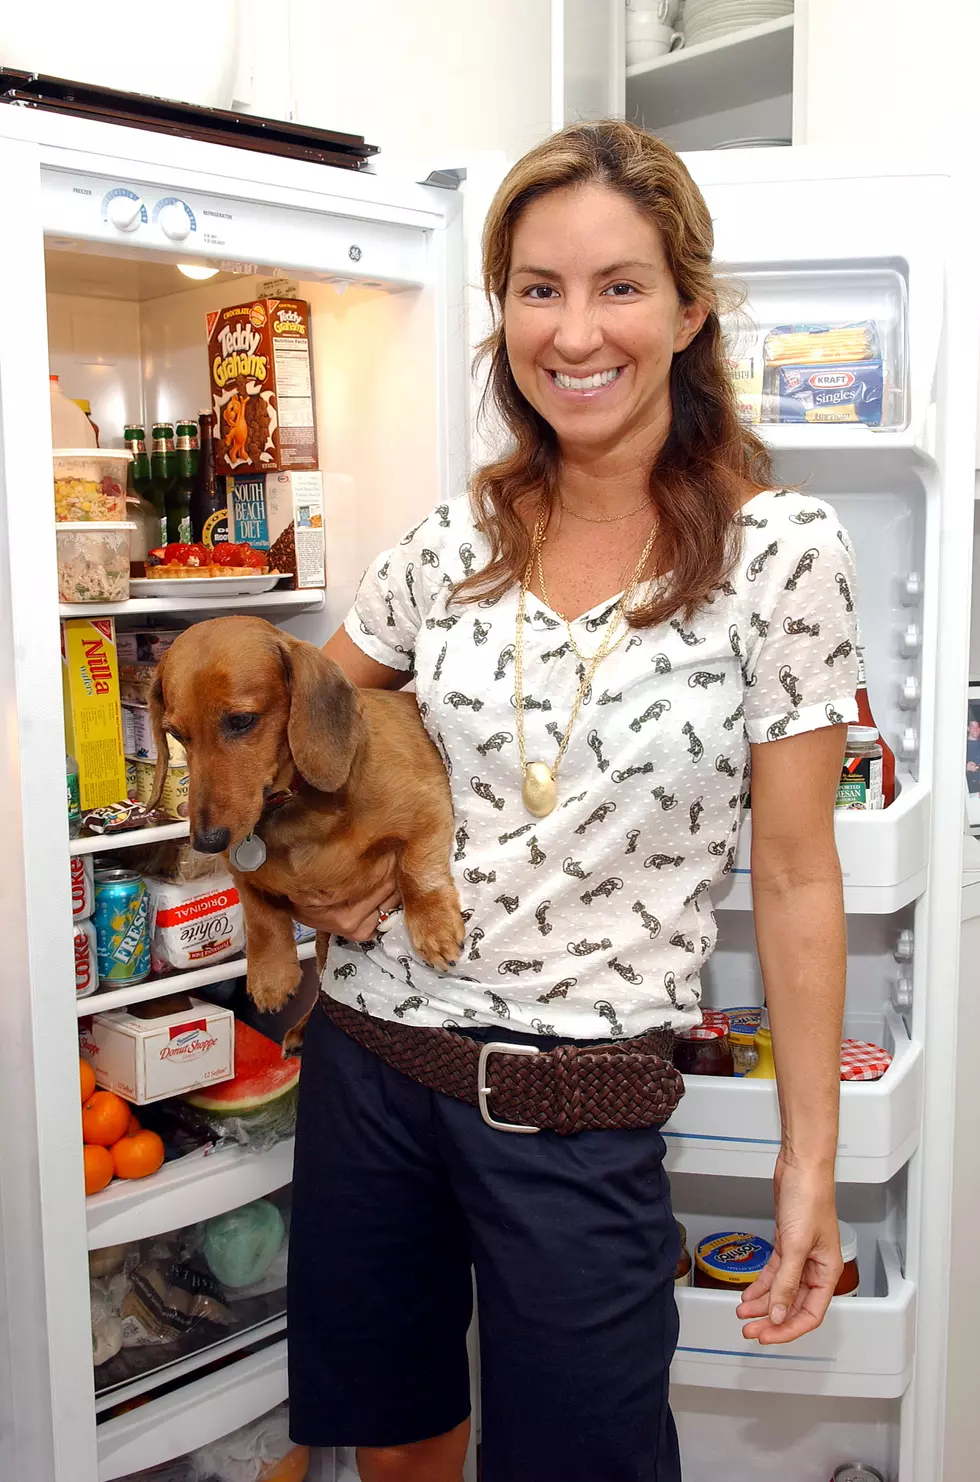 Dog Learns to Drink Water Right From the Fridge [VIDEO]